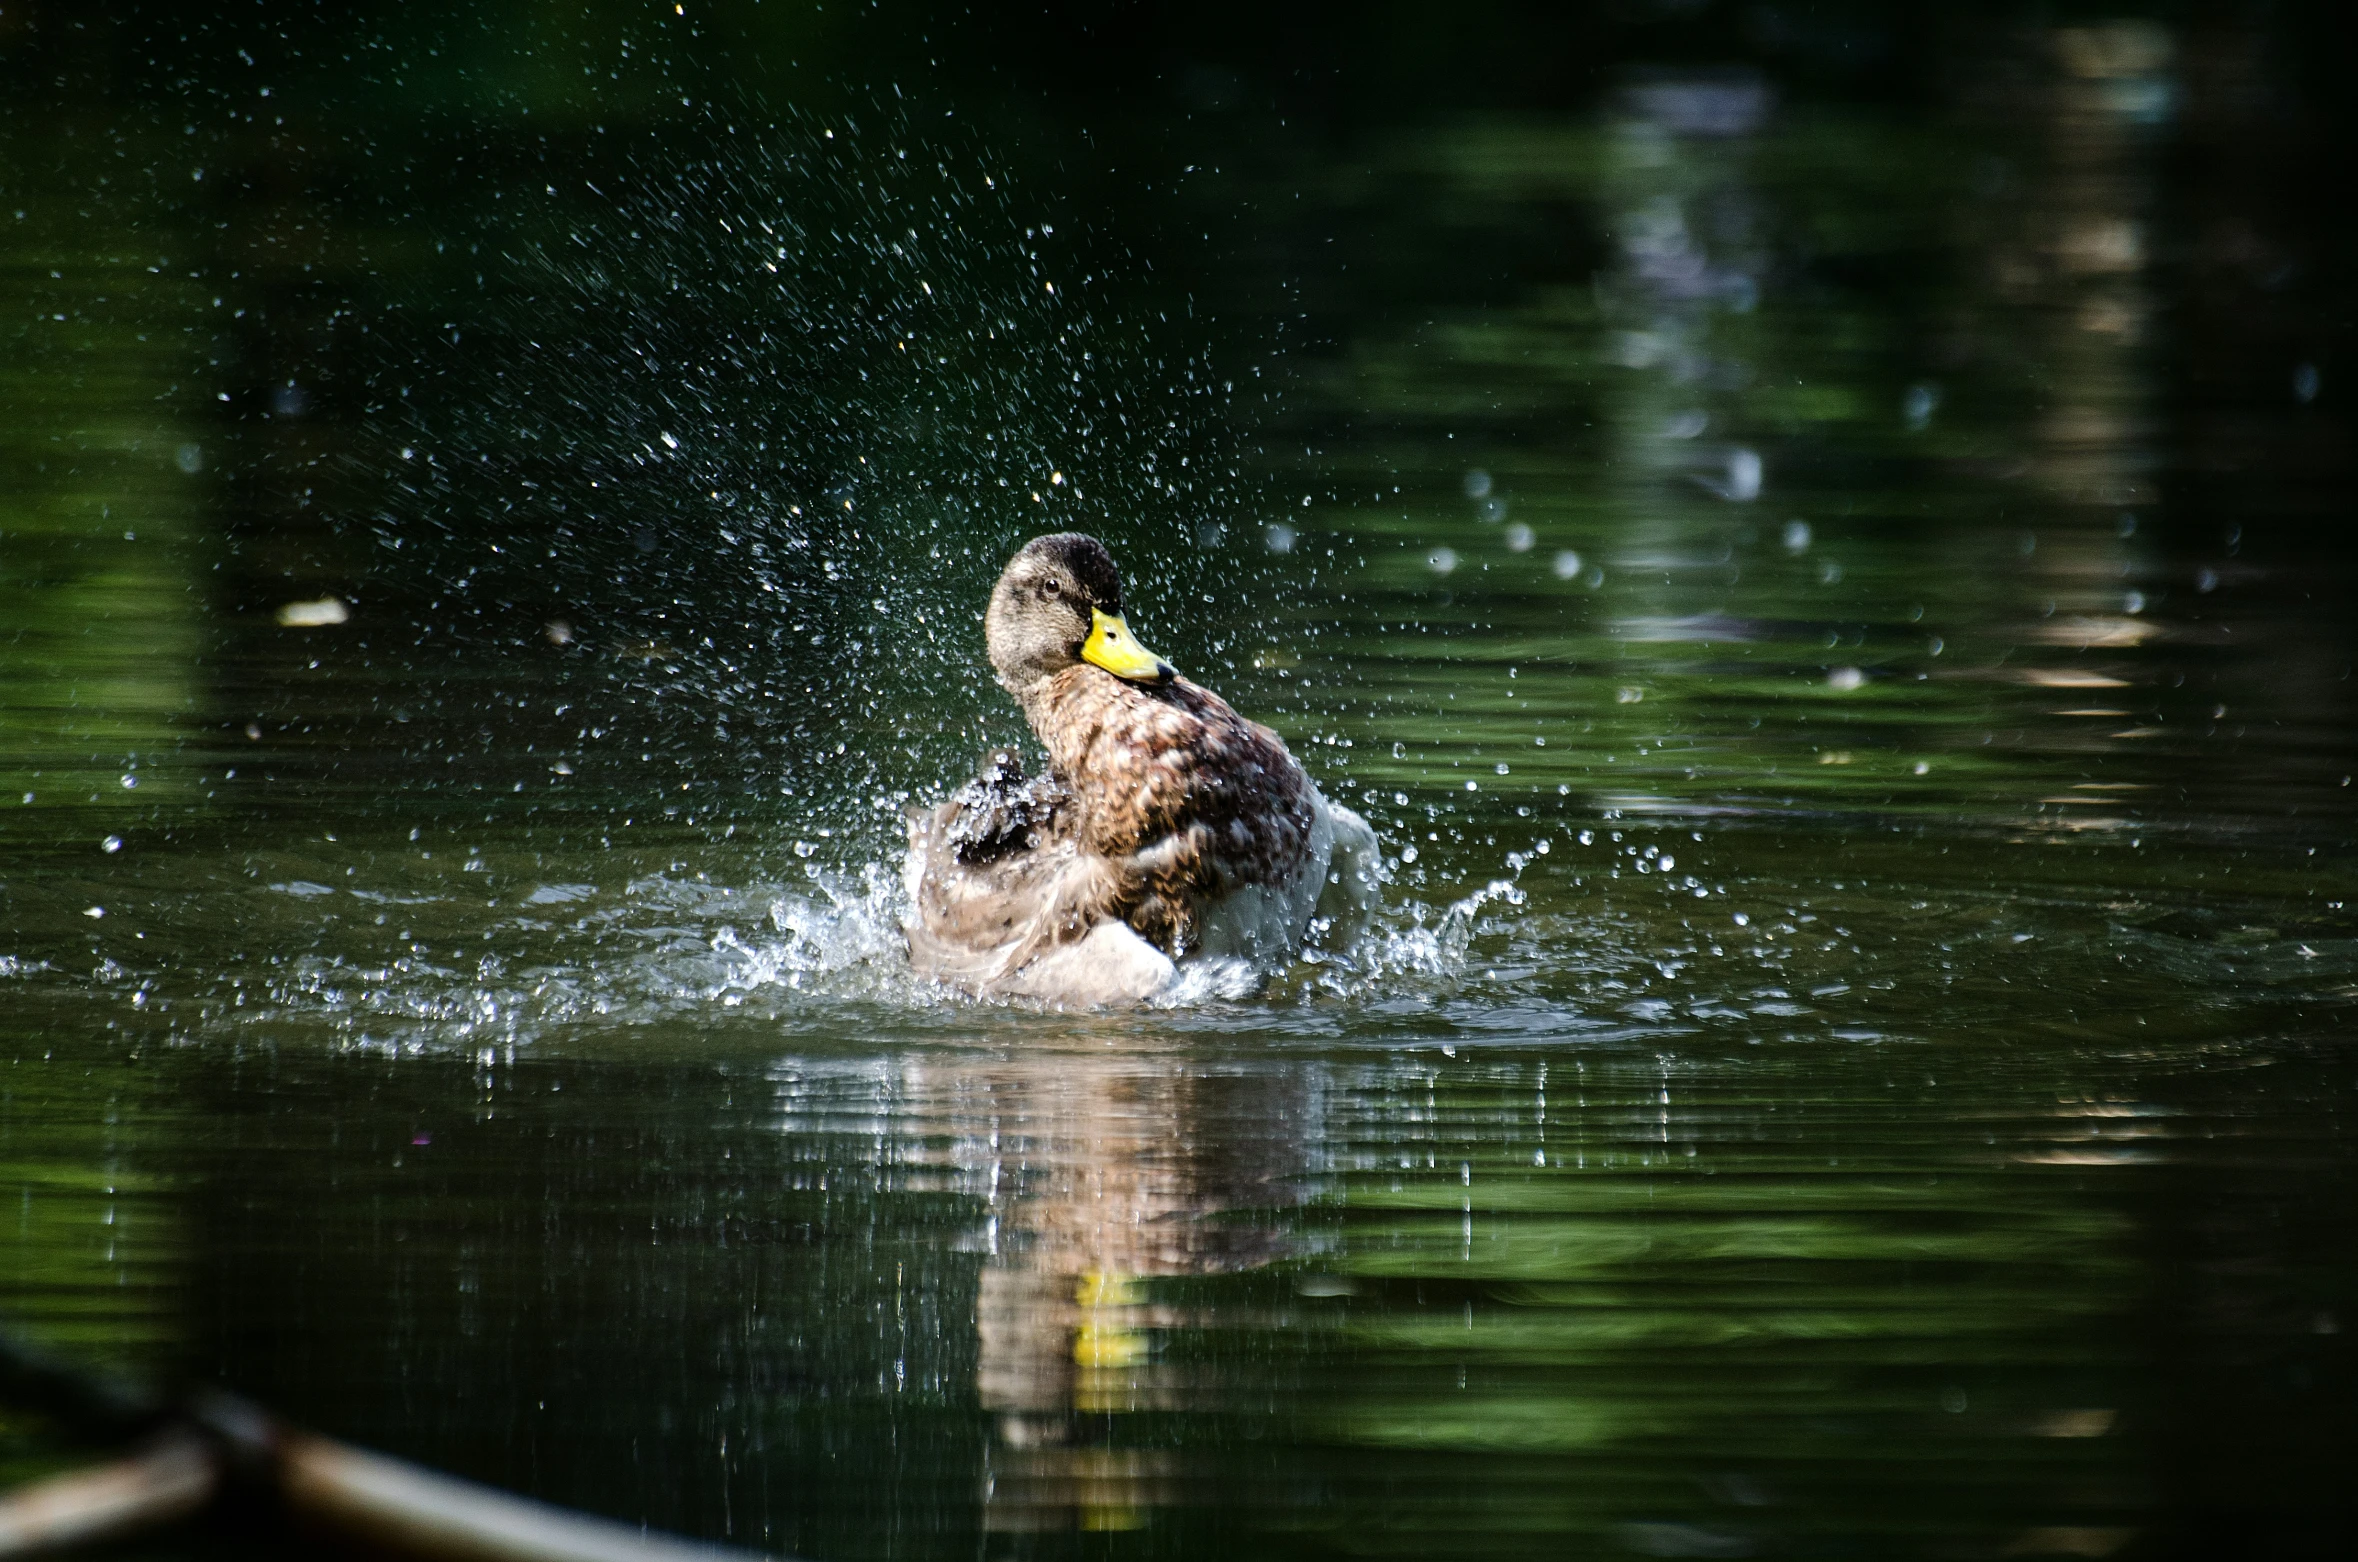 a duck in the water getting splash from it